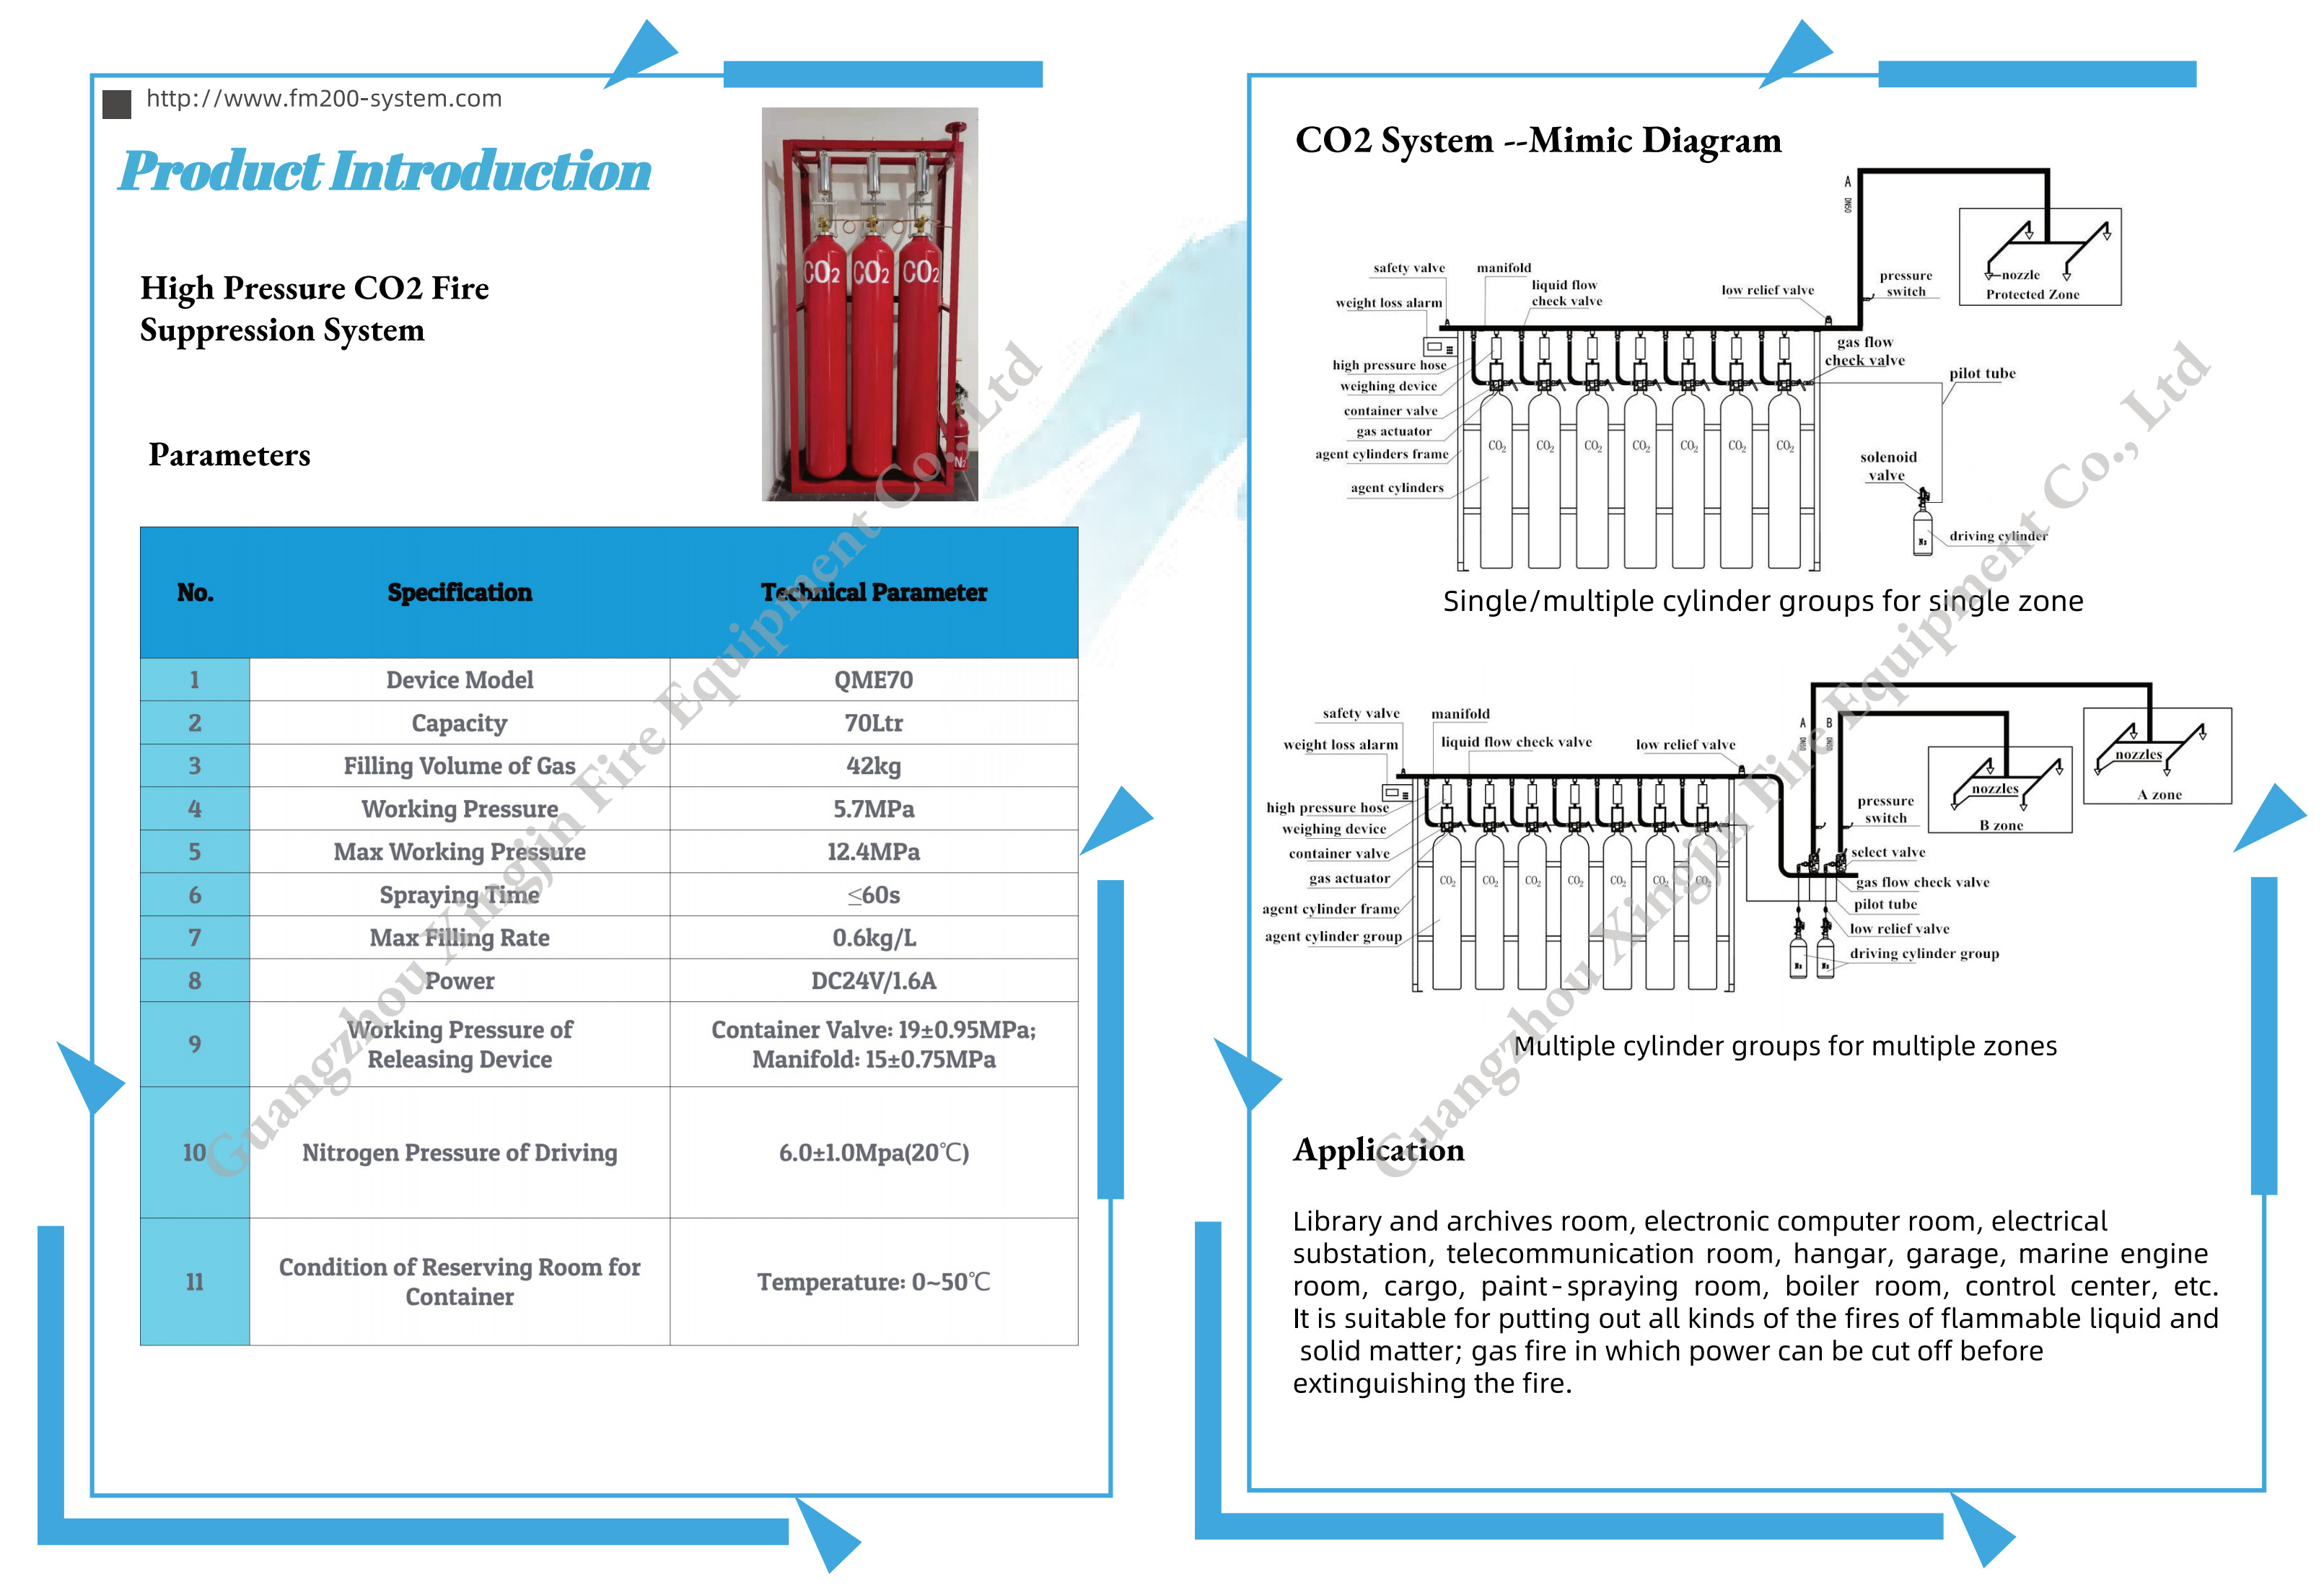 Latest company case about Catalogue of CO2 fire suppression system (2021 edition)